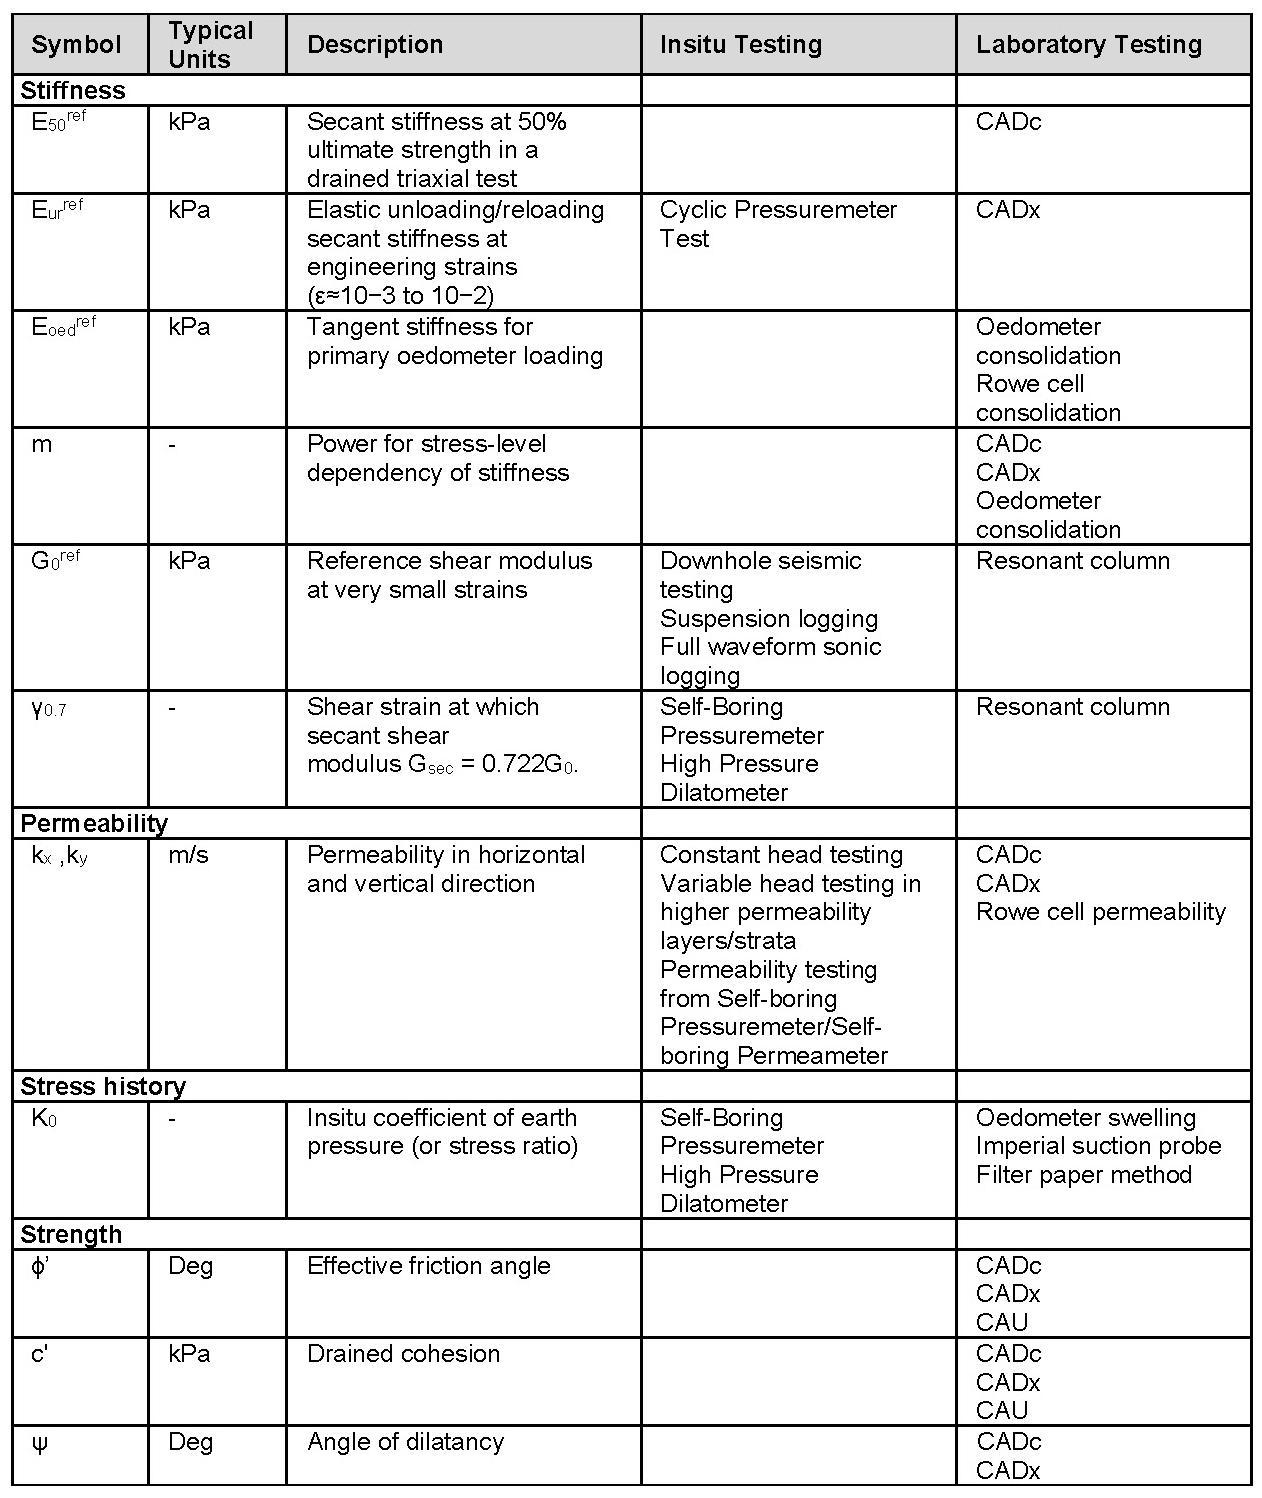 Table of key parameters for the modelling of cutting heave and relevant Insitu and Laboratory Testin